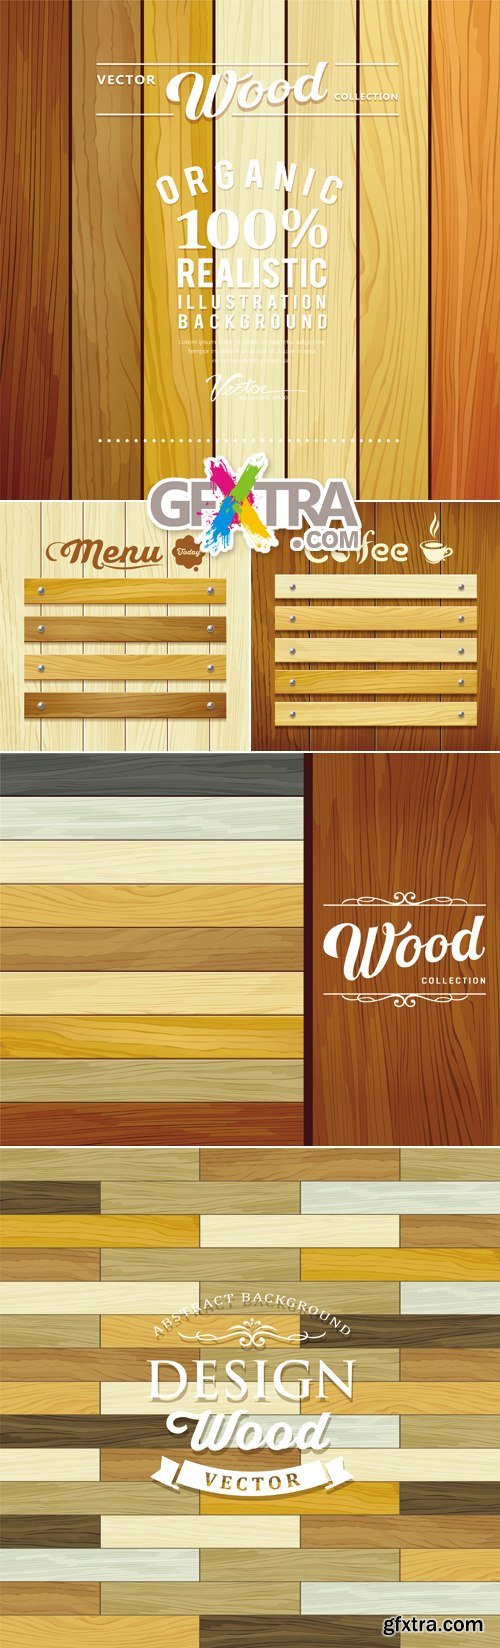 Wooden Planks & Boards Backgrounds Vector